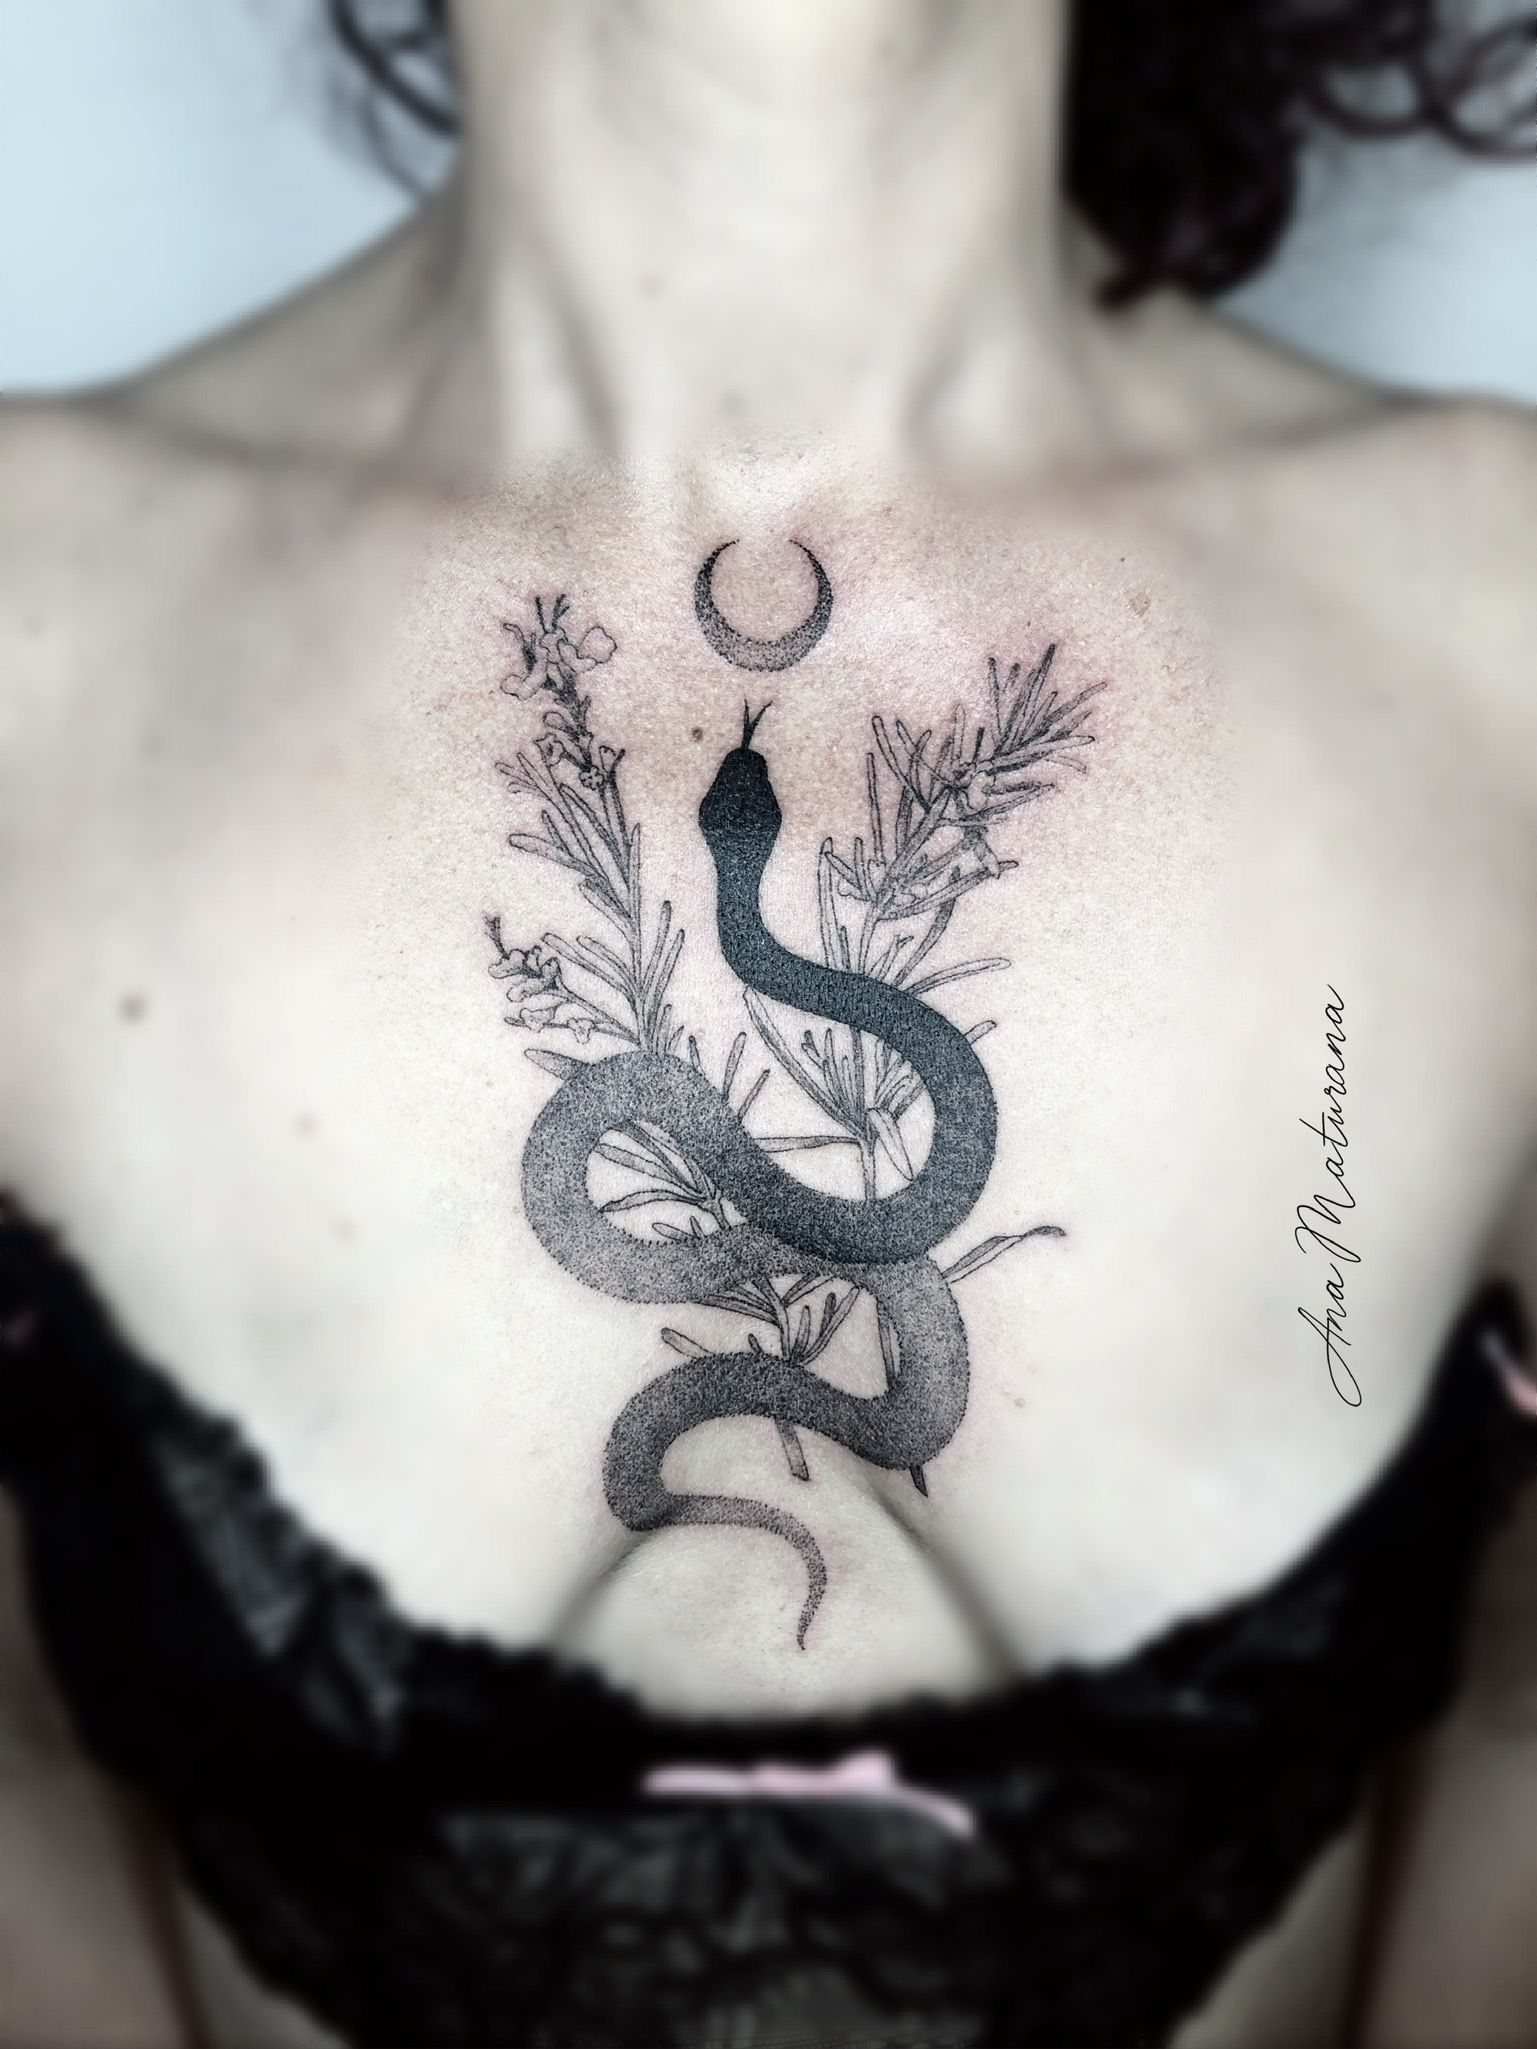 Rose and Dagger  Crescent moon and snake shoulder tattoo Done by artist  John Pidwell  Facebook